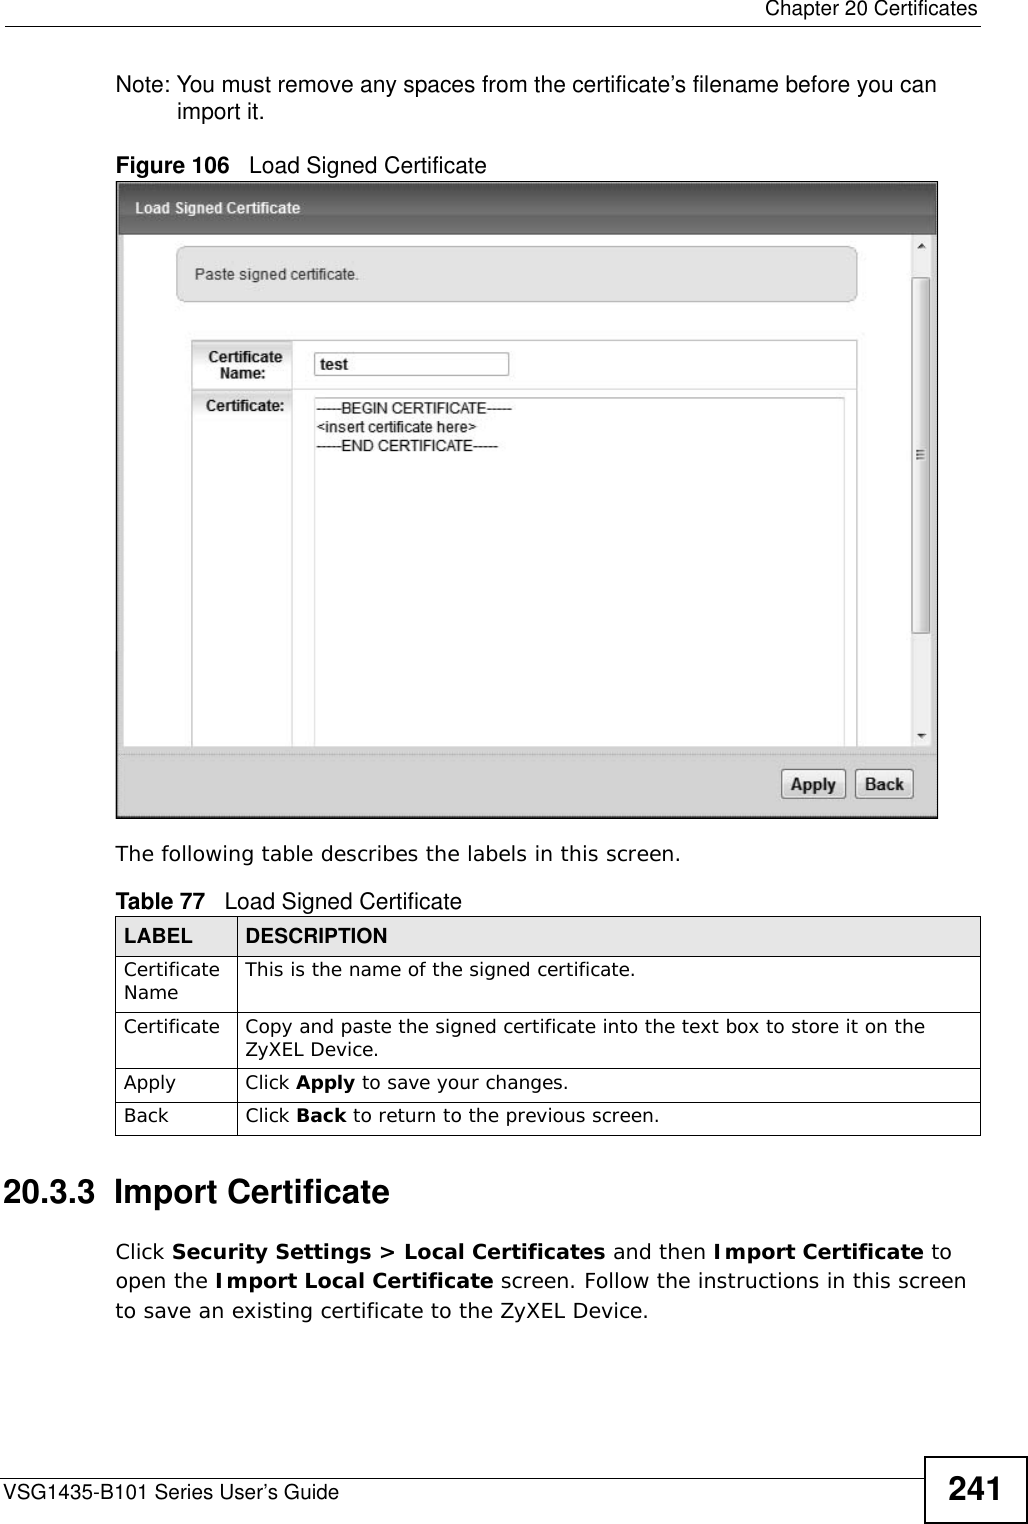  Chapter 20 CertificatesVSG1435-B101 Series User’s Guide 241Note: You must remove any spaces from the certificate’s filename before you can import it.Figure 106   Load Signed Certificate The following table describes the labels in this screen. 20.3.3  Import Certificate Click Security Settings &gt; Local Certificates and then Import Certificate to open the Import Local Certificate screen. Follow the instructions in this screen to save an existing certificate to the ZyXEL Device. Table 77   Load Signed CertificateLABEL DESCRIPTIONCertificate Name This is the name of the signed certificate. Certificate Copy and paste the signed certificate into the text box to store it on the ZyXEL Device.Apply Click Apply to save your changes.Back Click Back to return to the previous screen.